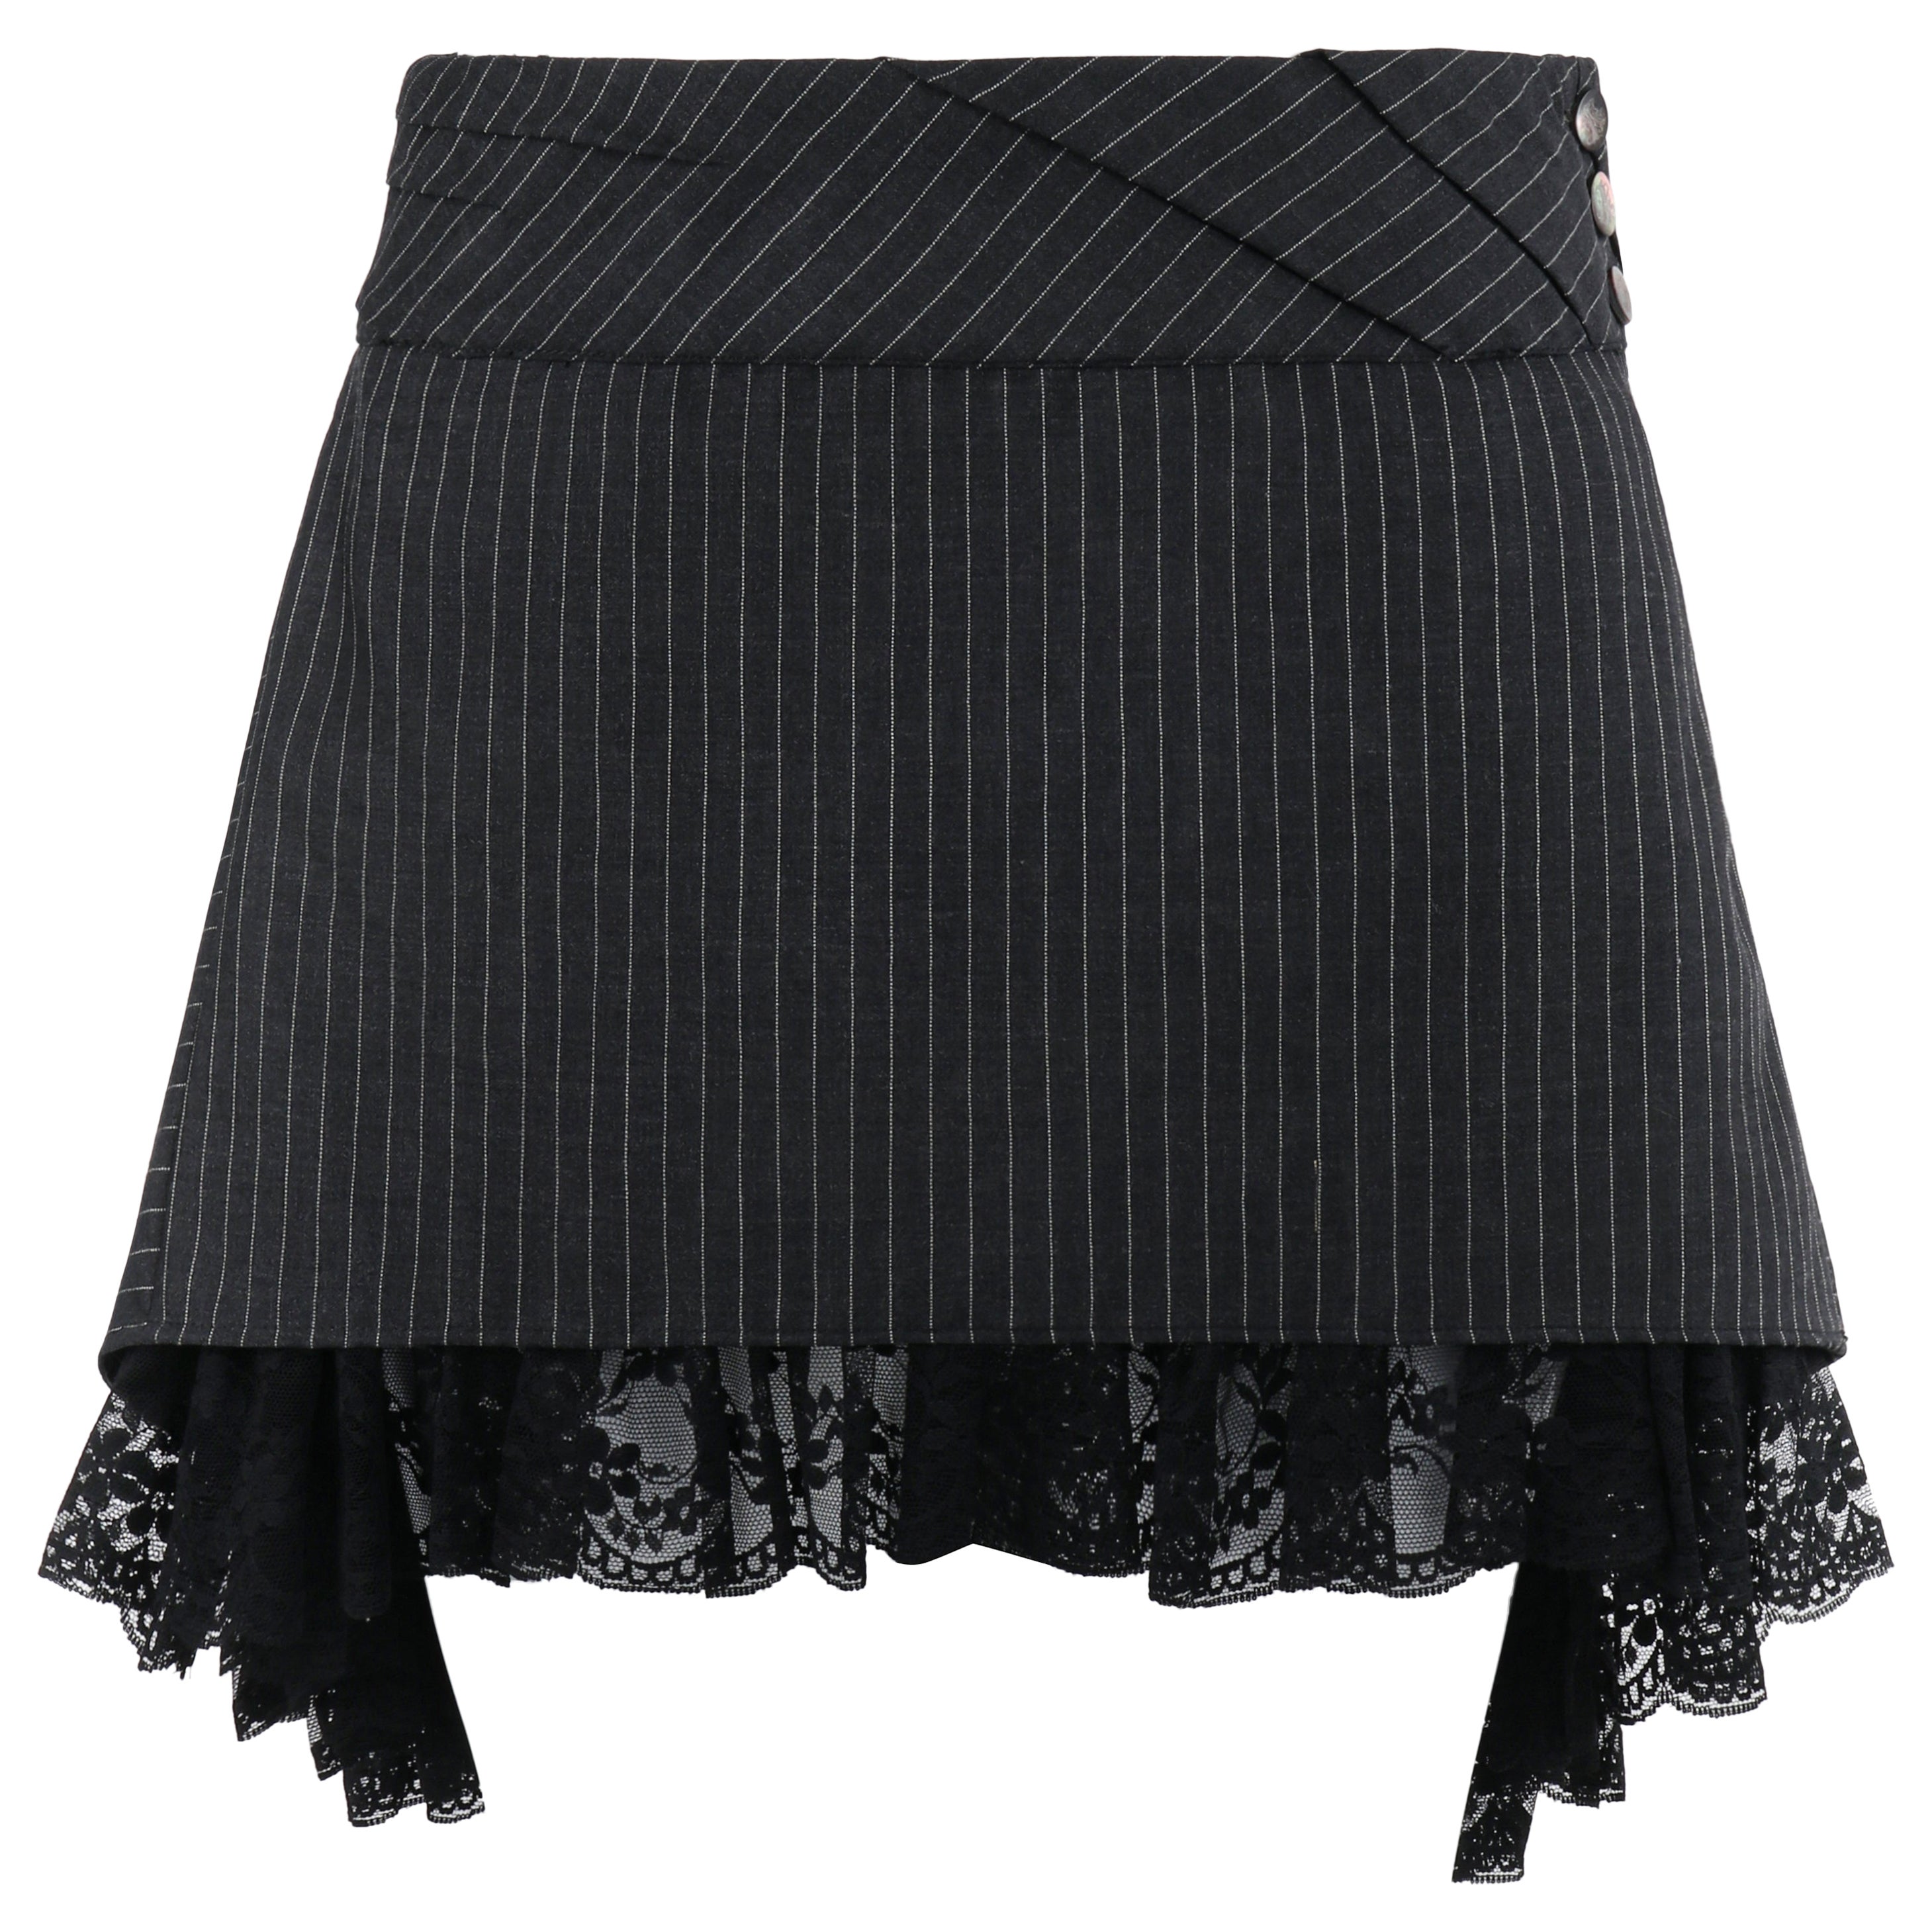 ALEXANDER McQUEEN S/S 1999 "No.13" Lace Pinstripe Pleat Waistband Mini Skirt For Sale